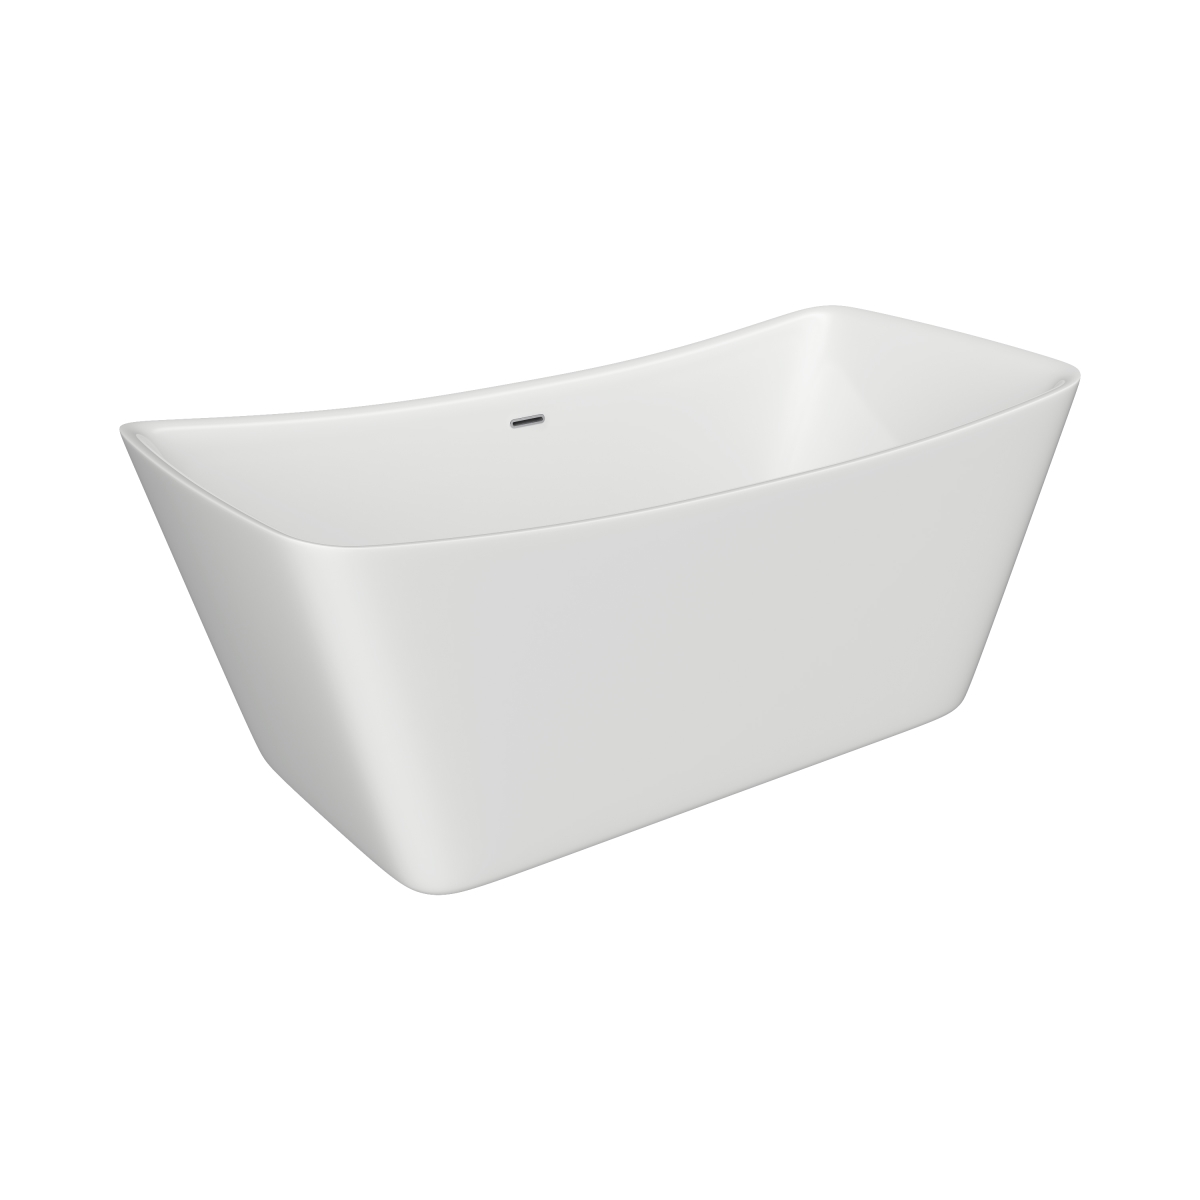 Picture of A&E Bath and Shower BT-425 A&E Bath and Shower Kyla Bathtub in White